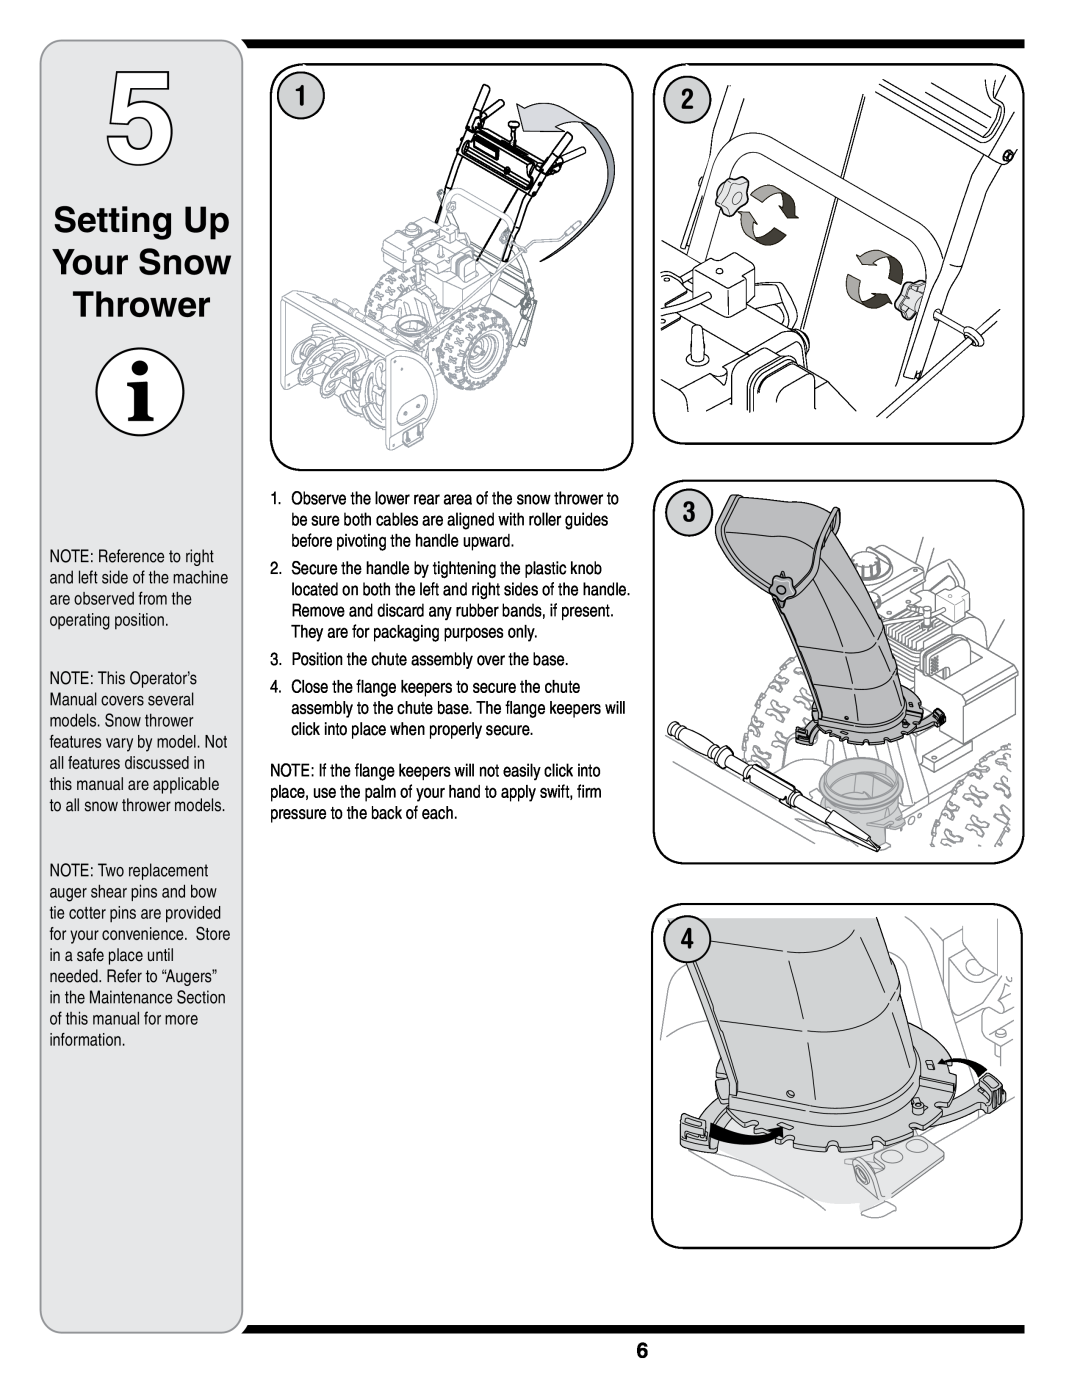 MTD 769-01275D warranty Setting Up Your Snow Thrower, Position the chute assembly over the base 